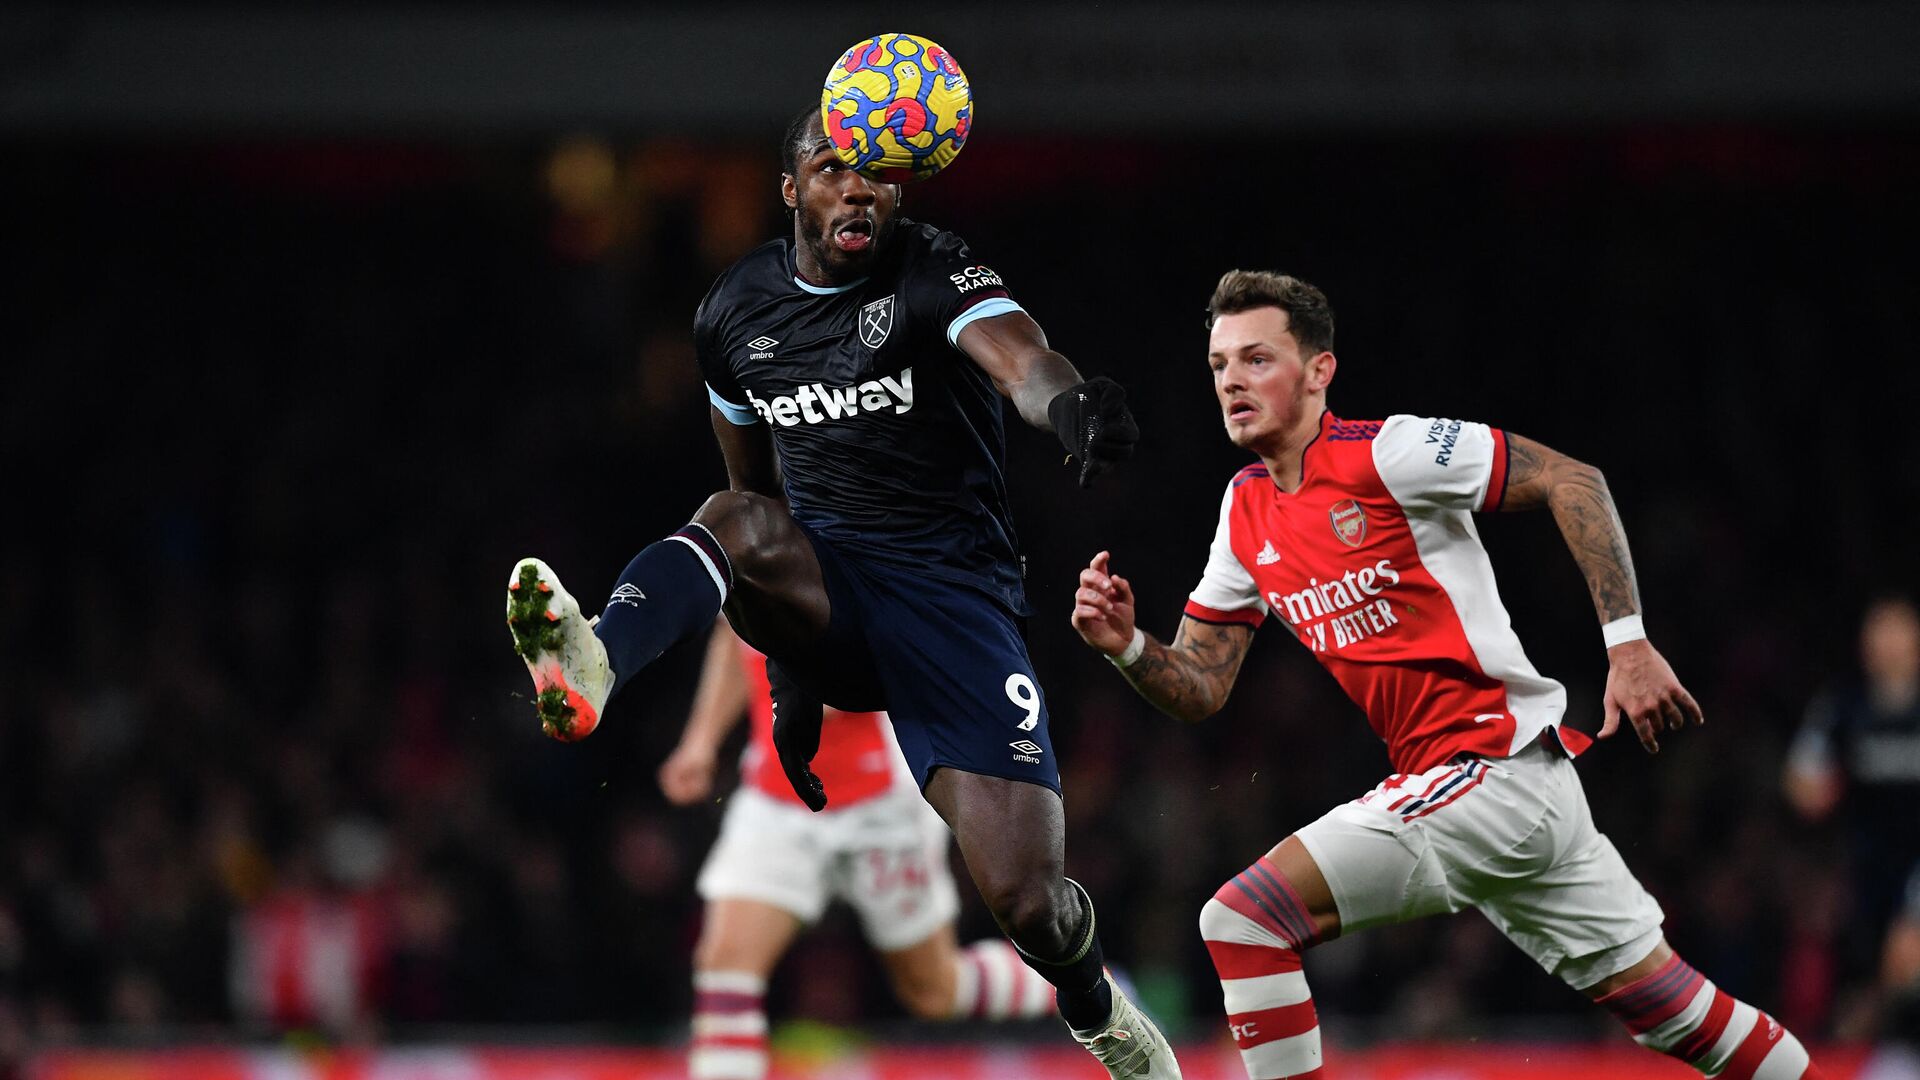 West Ham United's English midfielder Michail Antonio (L) vies with Arsenal's English defender Ben White (R) during the English Premier League football match between Arsenal and West Ham United at the Emirates Stadium in London on December 15, 2021. (Photo by Ben STANSALL / AFP) / RESTRICTED TO EDITORIAL USE. No use with unauthorized audio, video, data, fixture lists, club/league logos or 'live' services. Online in-match use limited to 120 images. An additional 40 images may be used in extra time. No video emulation. Social media in-match use limited to 120 images. An additional 40 images may be used in extra time. No use in betting publications, games or single club/league/player publications. /  - РИА Новости, 1920, 16.12.2021